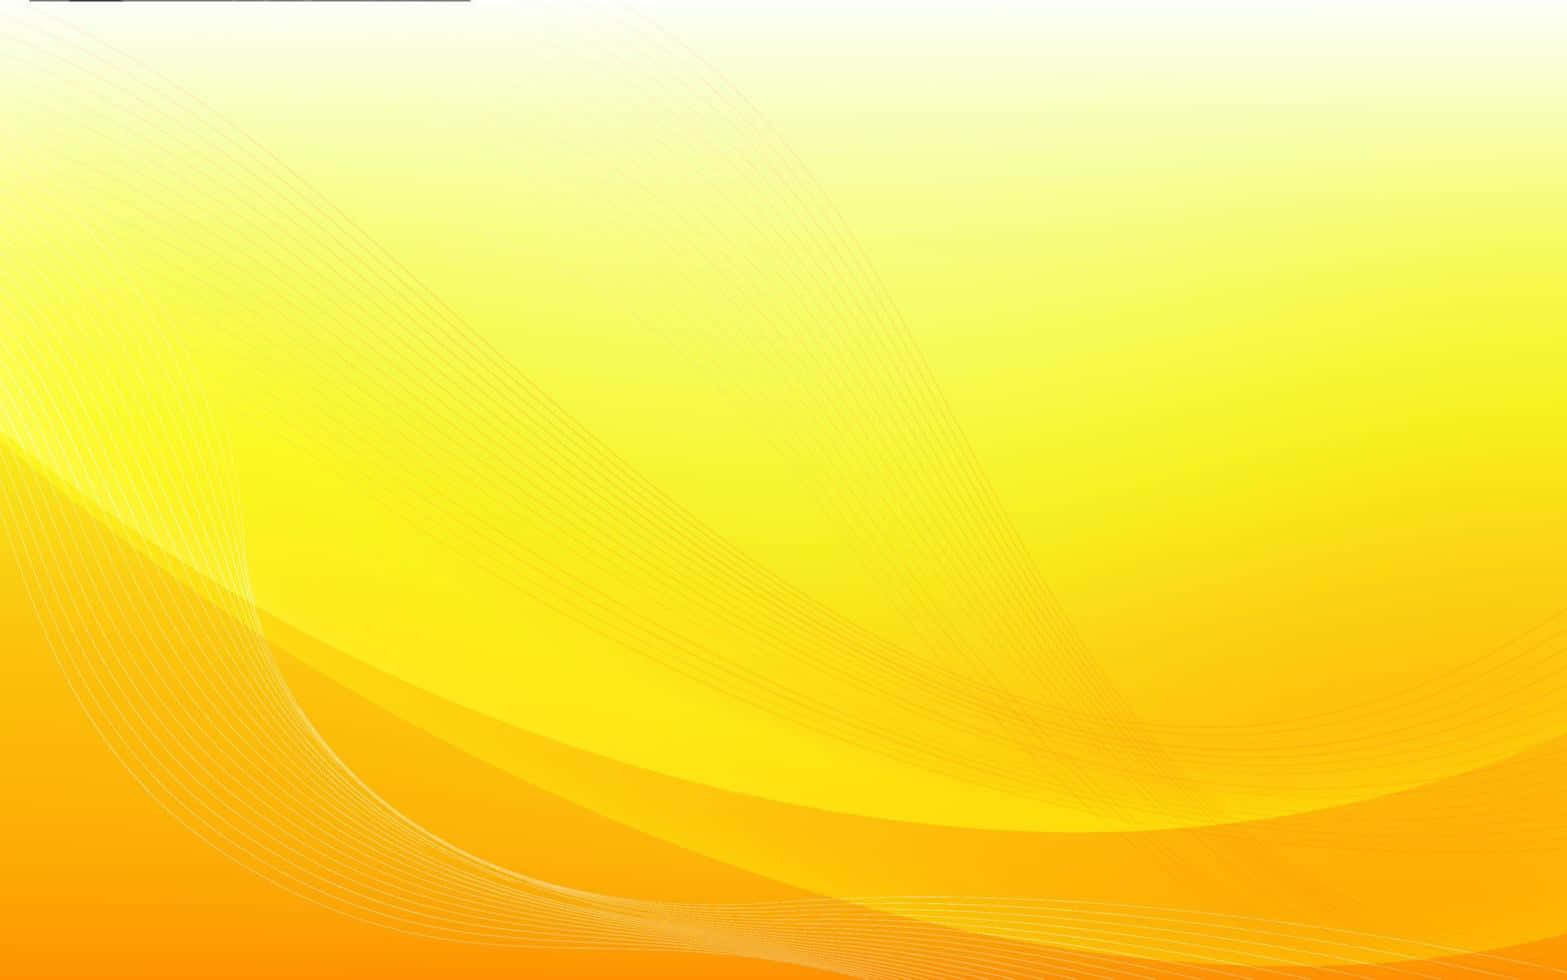 An Abstract Yellow Background With A Wave Pattern